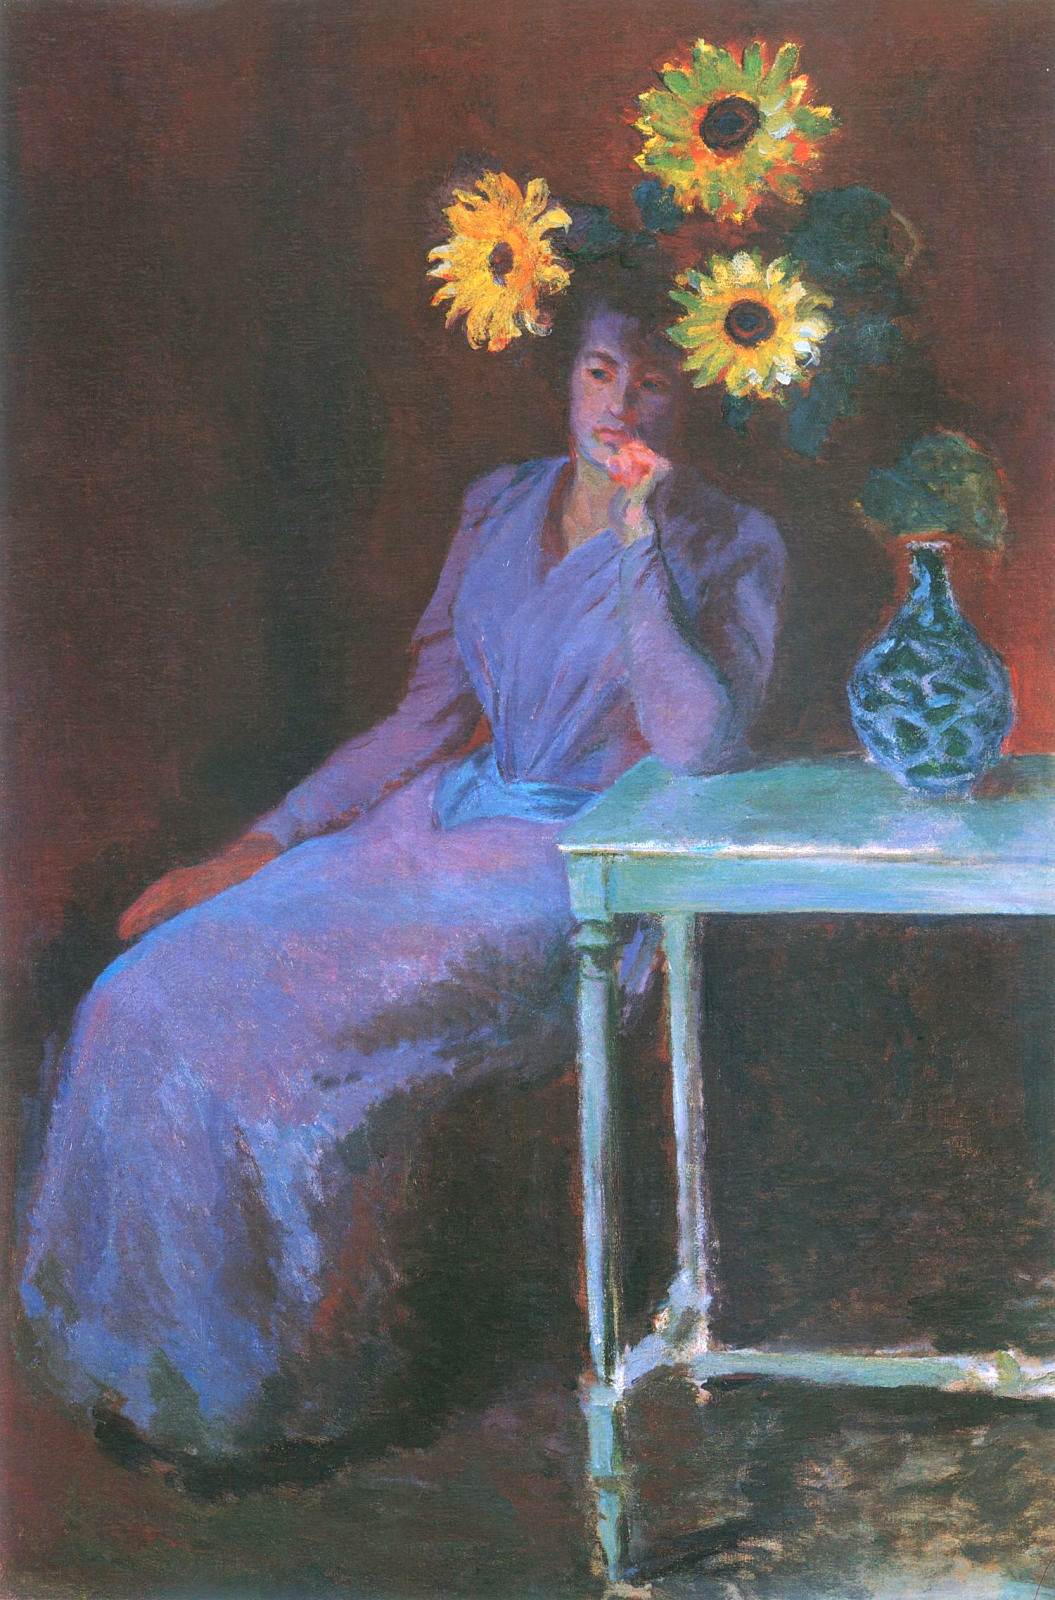 Portrait of Suzanne Hoschede with Sunflowers 1890